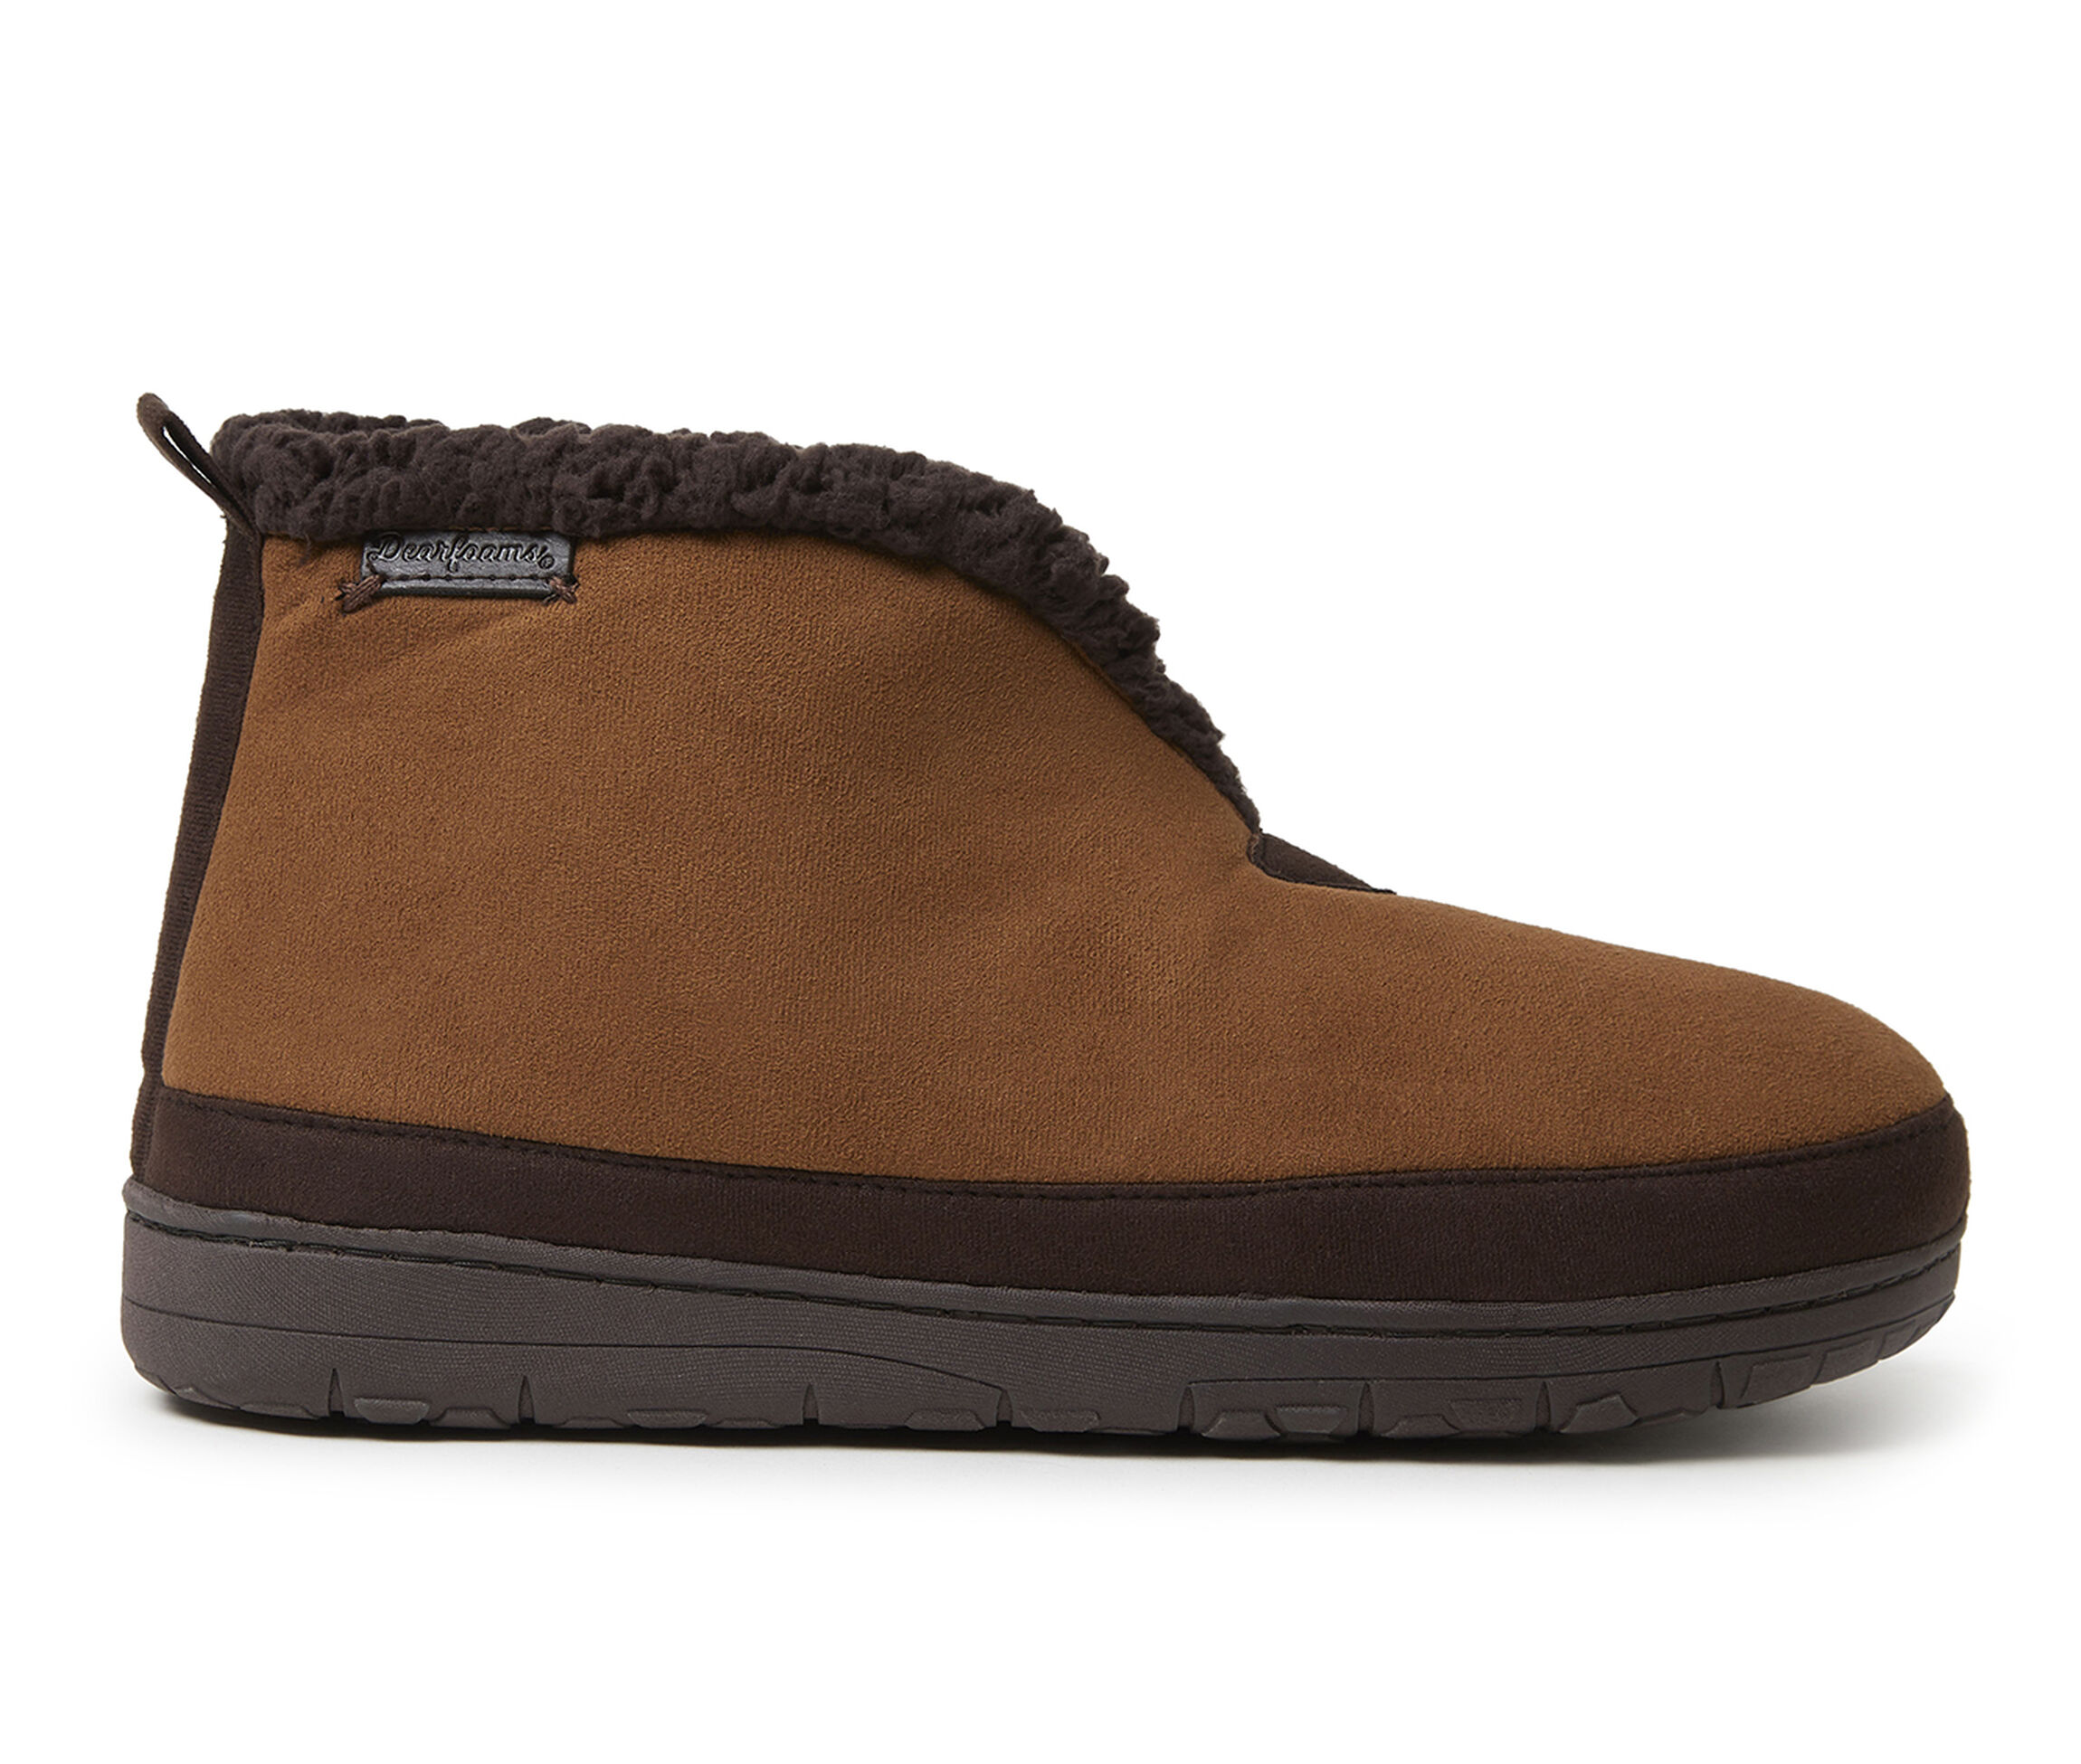 Dearfoams Microsuede Boots with Mudguard  (Brown  Canvas)